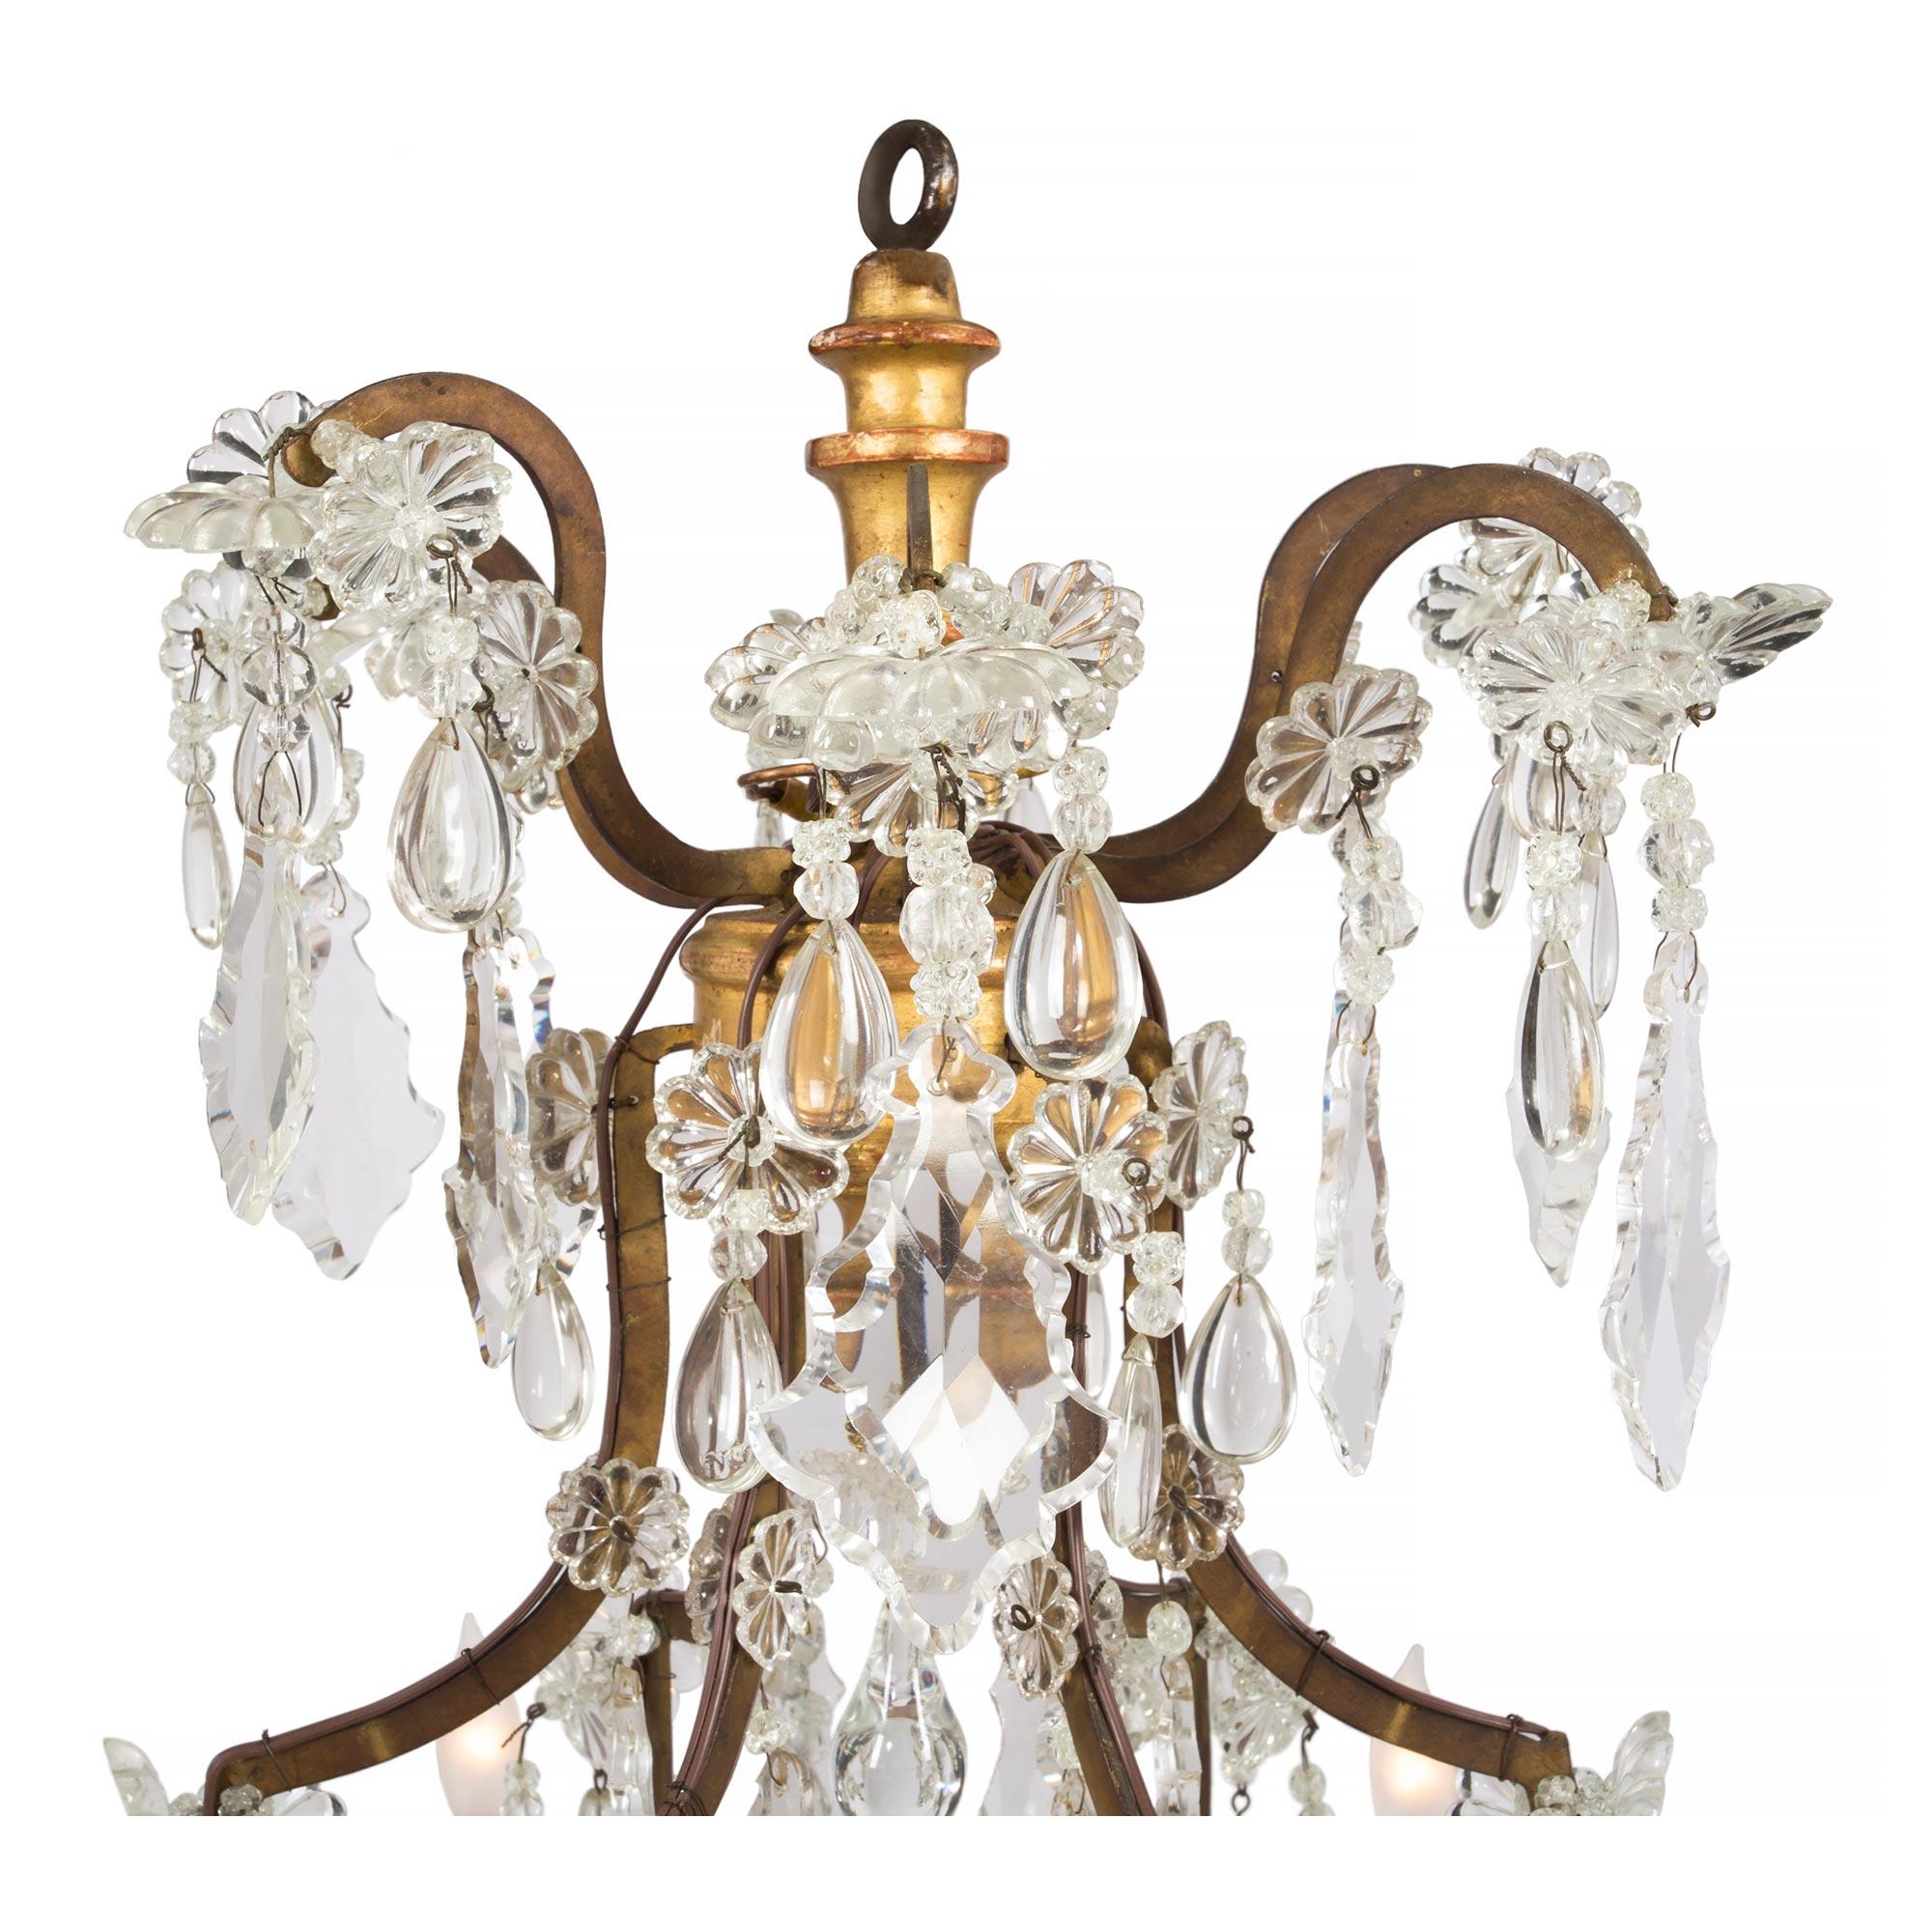 A wonderful Italian 19th century giltwood and crystal seven light chandelier. The six metal scrolled arms end in giltwood bobeches and are joined by draping crystal garlands, centered by a single light. Decorated throughout with kite and teardrop